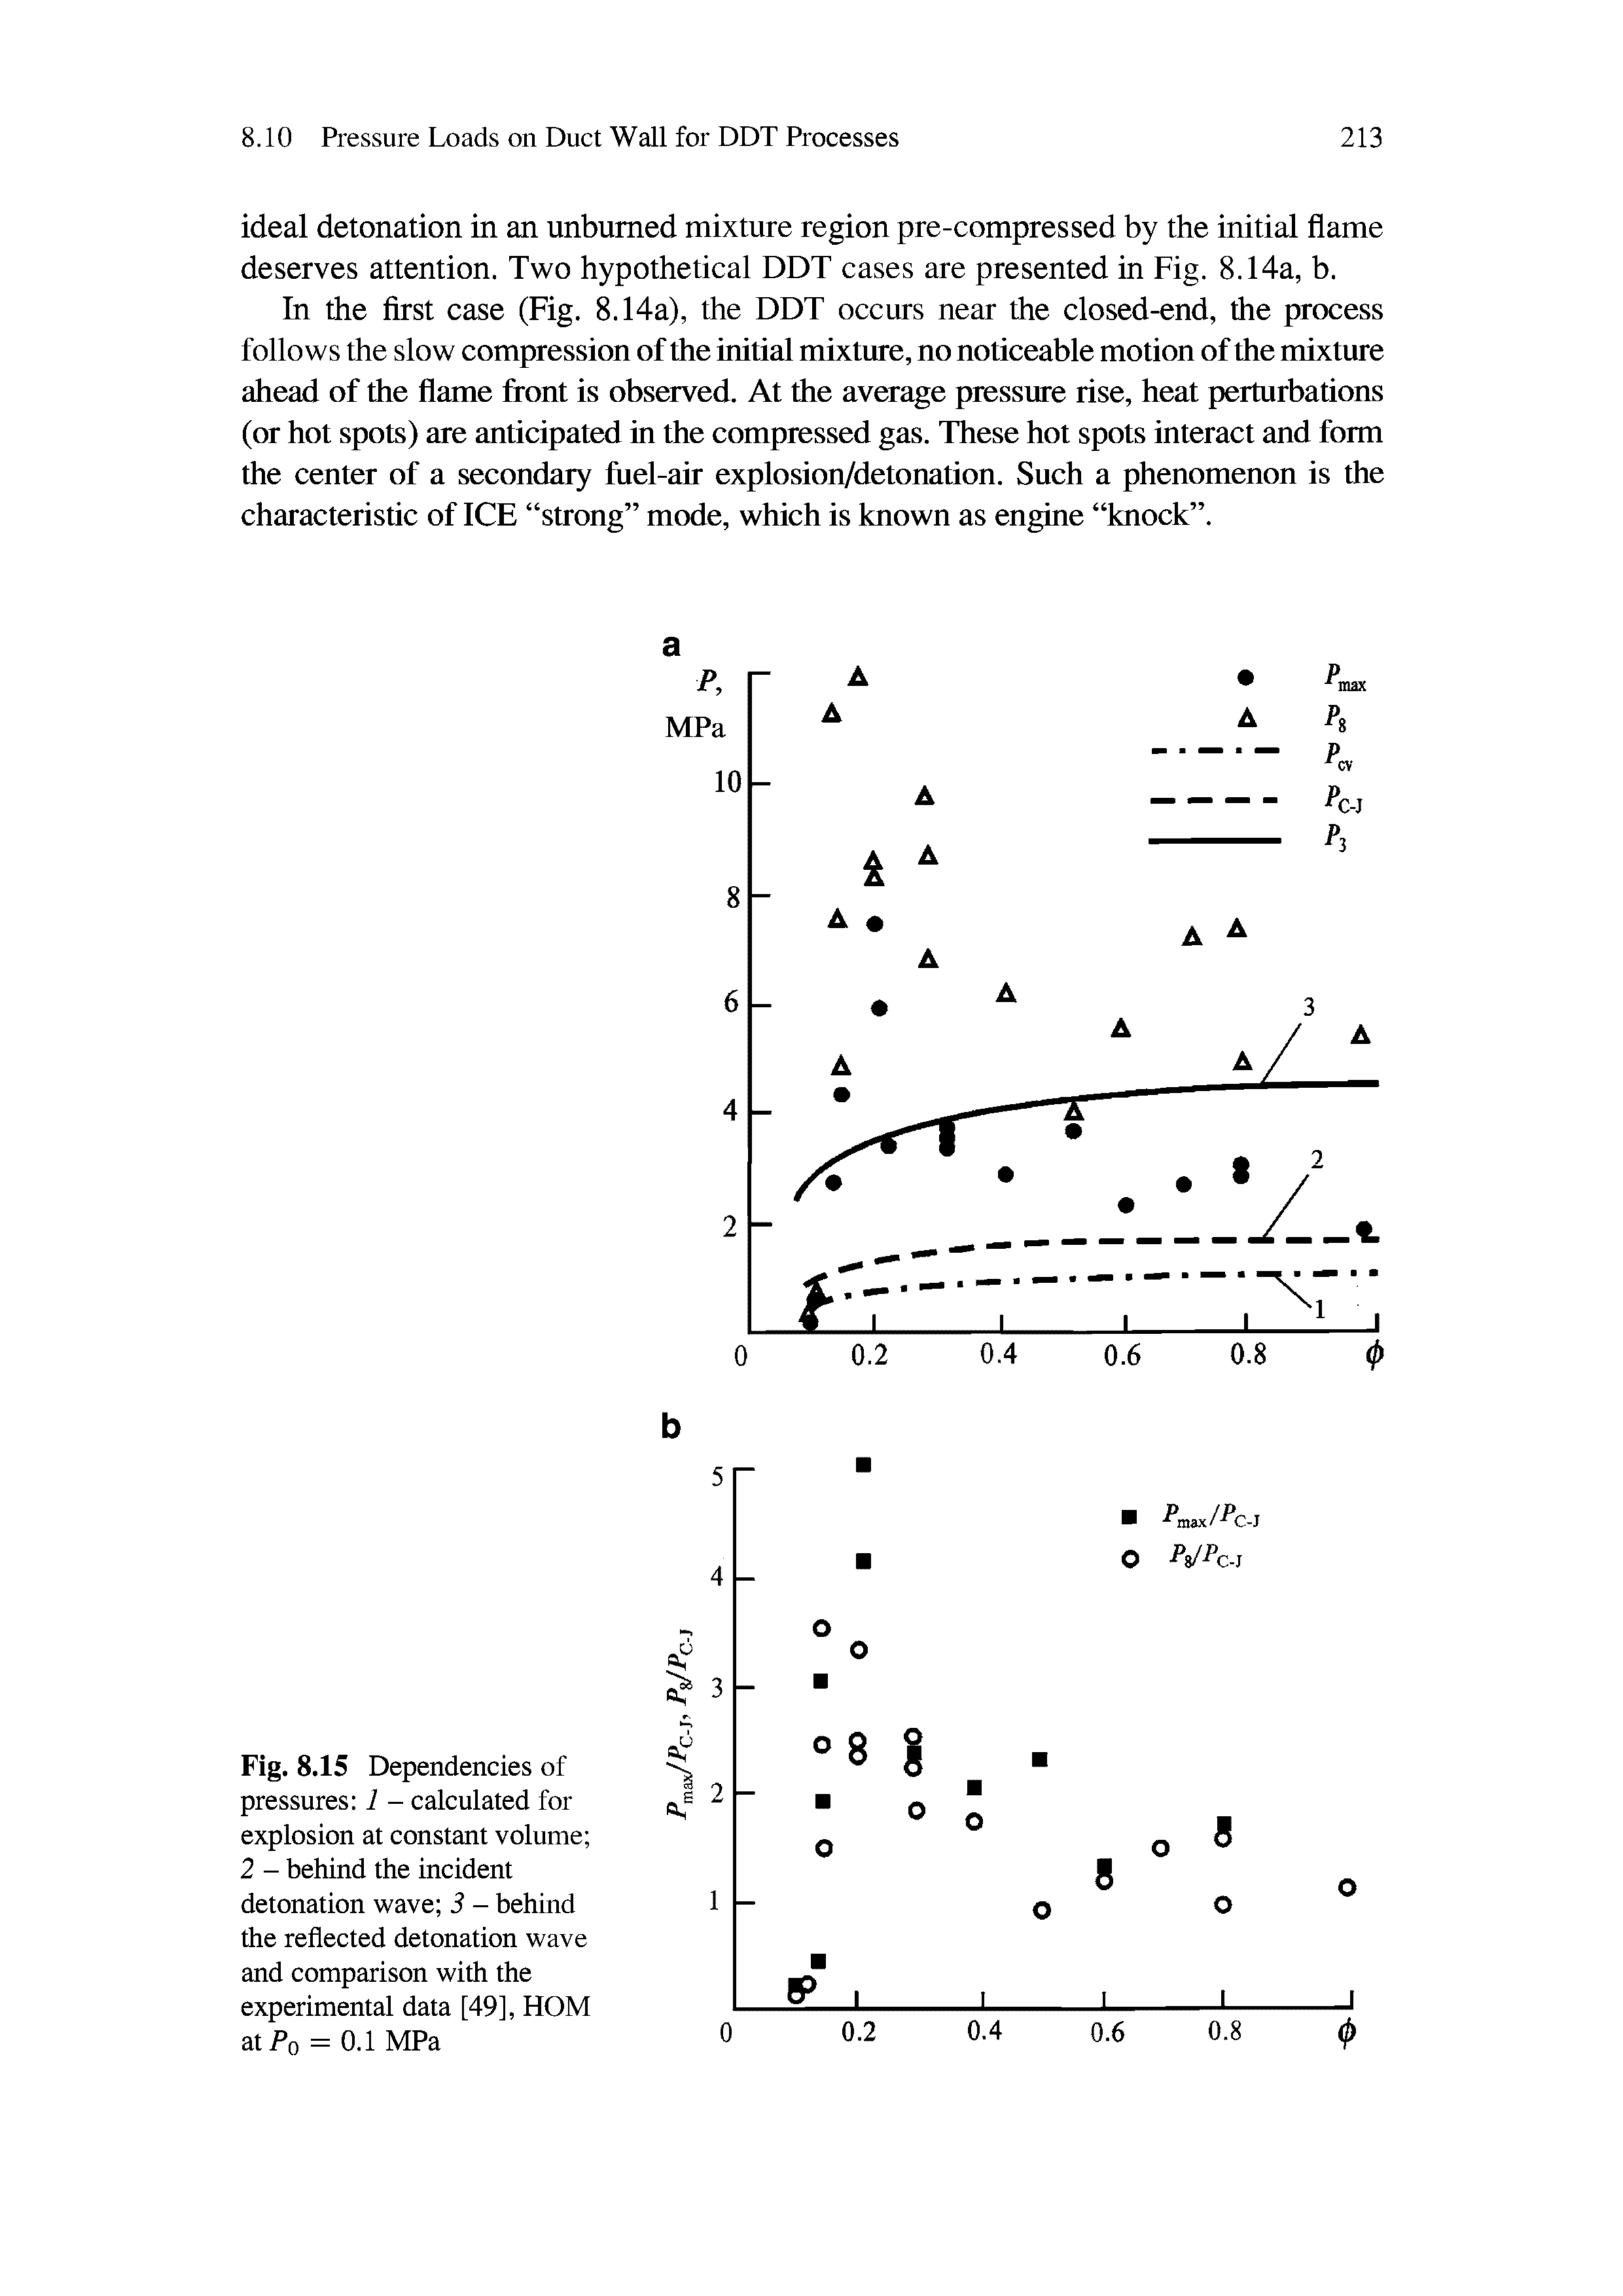 Fig. 8.15 Dependencies of pressures 1 - calculated for explosion at constant volume 2 - behind the incident detonation wave 3 - behind the reflected detonation wave and comparison with the experimental data [49], HOM atPo = 0-1 MPa...